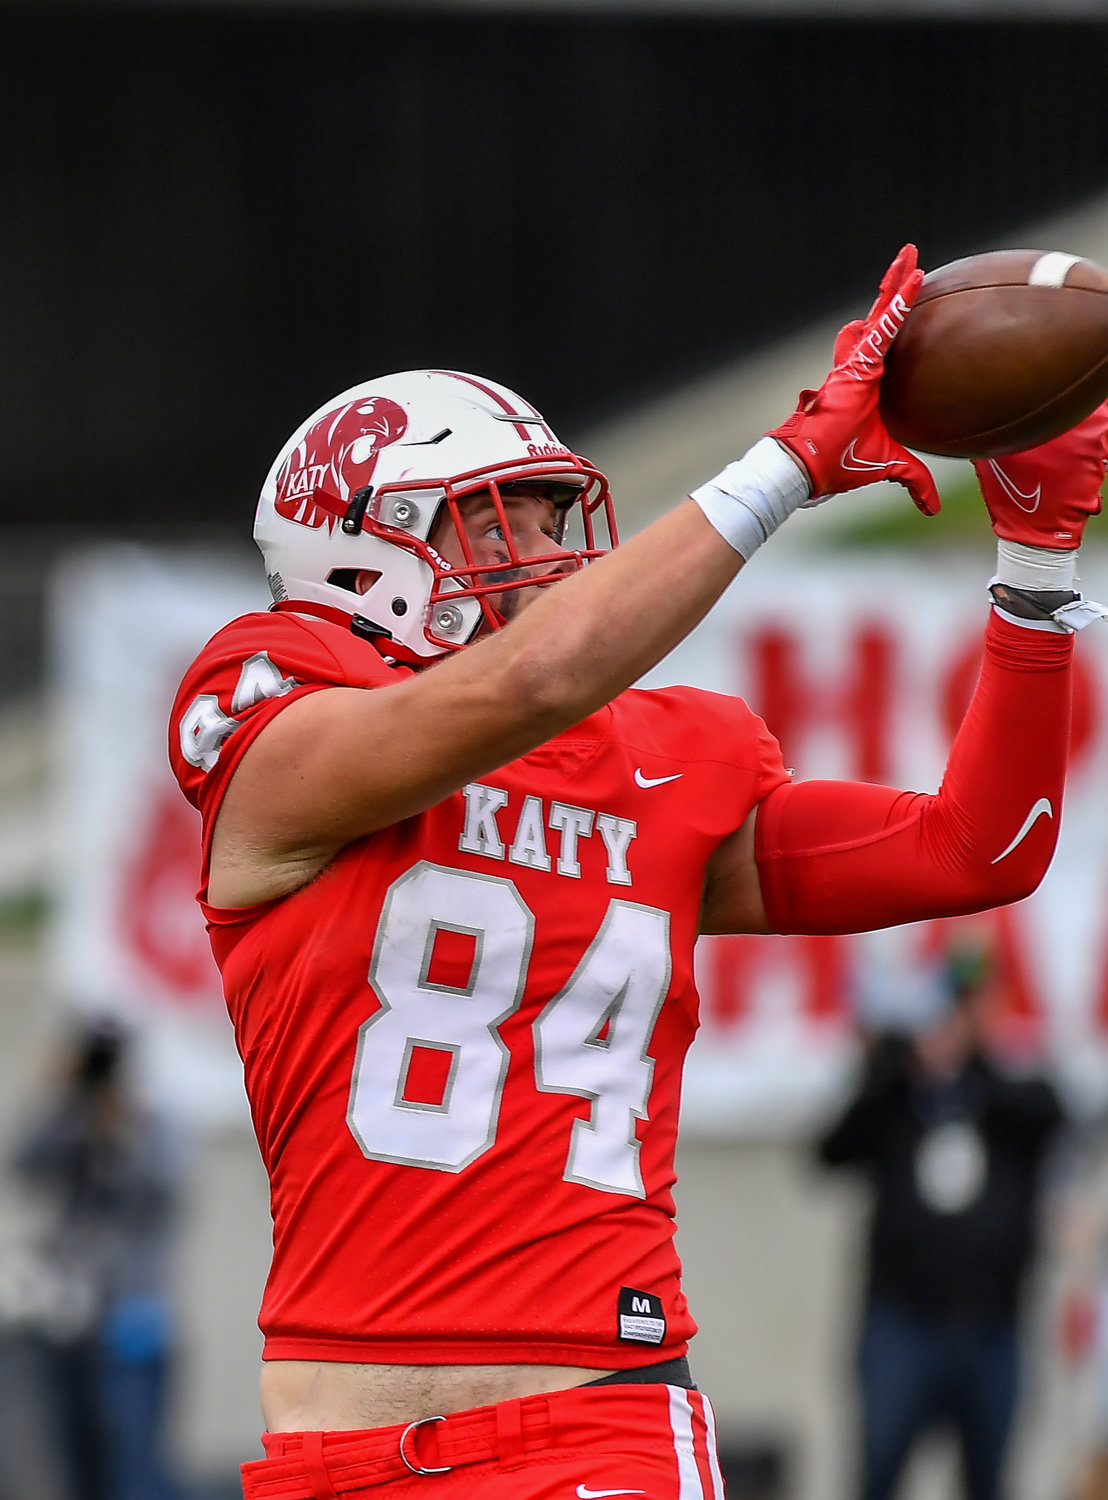 Katy Tx. Nov 26, 2021:  Katy's #84 Luke Carter makes the reception in the end zone for a TD during the UIL regional playoff game between Katy Tigers and King Panthers at Legacy Stadium in Katy. (Photo by Mark Goodman / Katy Times)